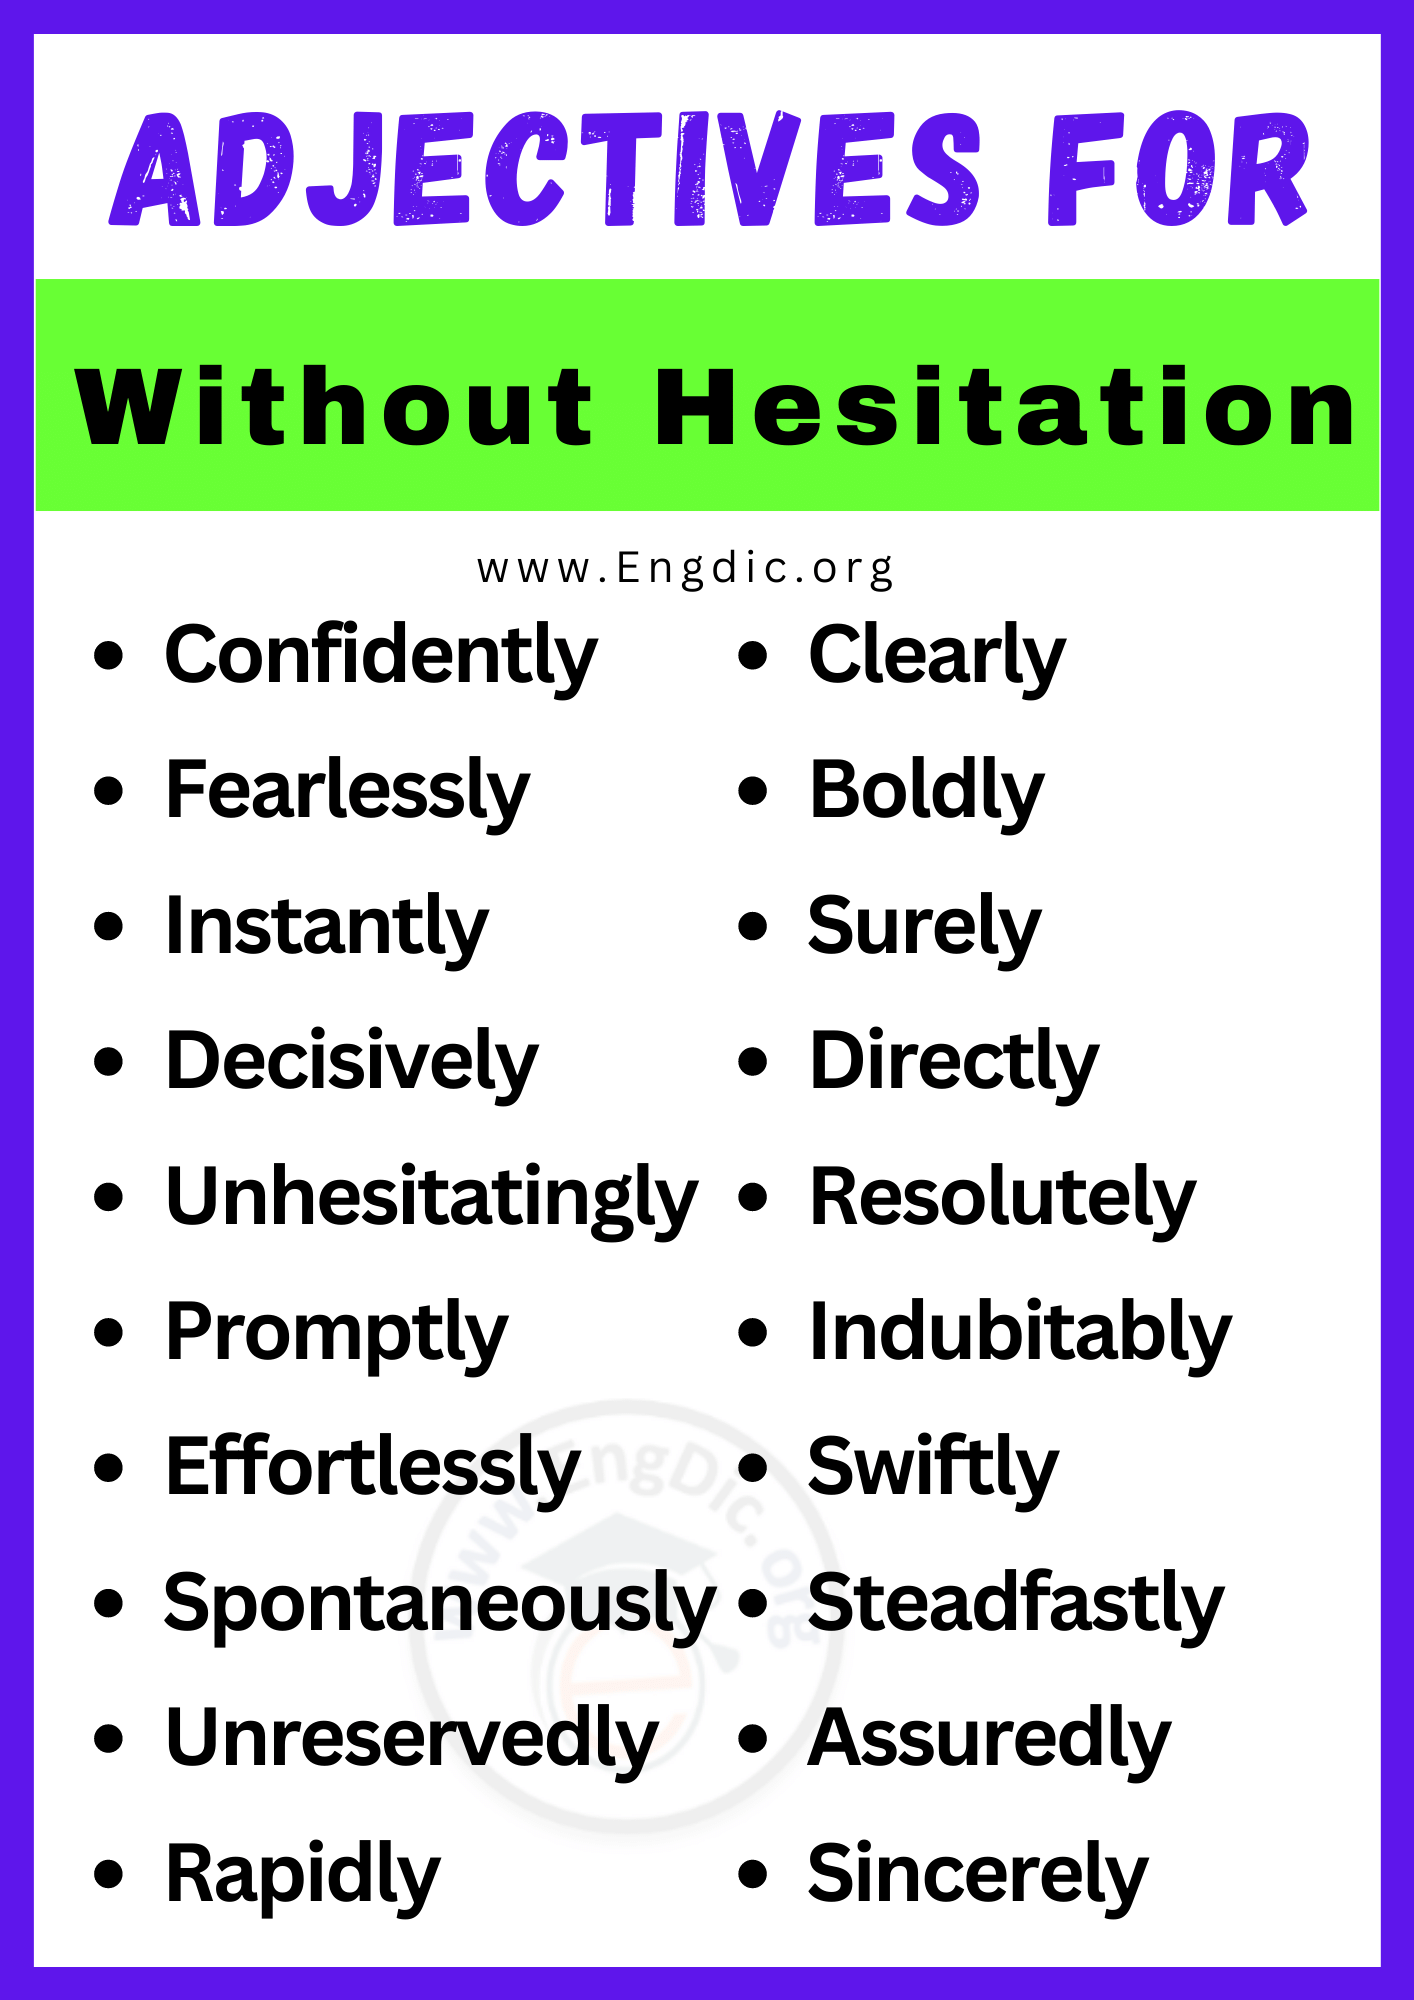 Adjectives for Without Hesitation